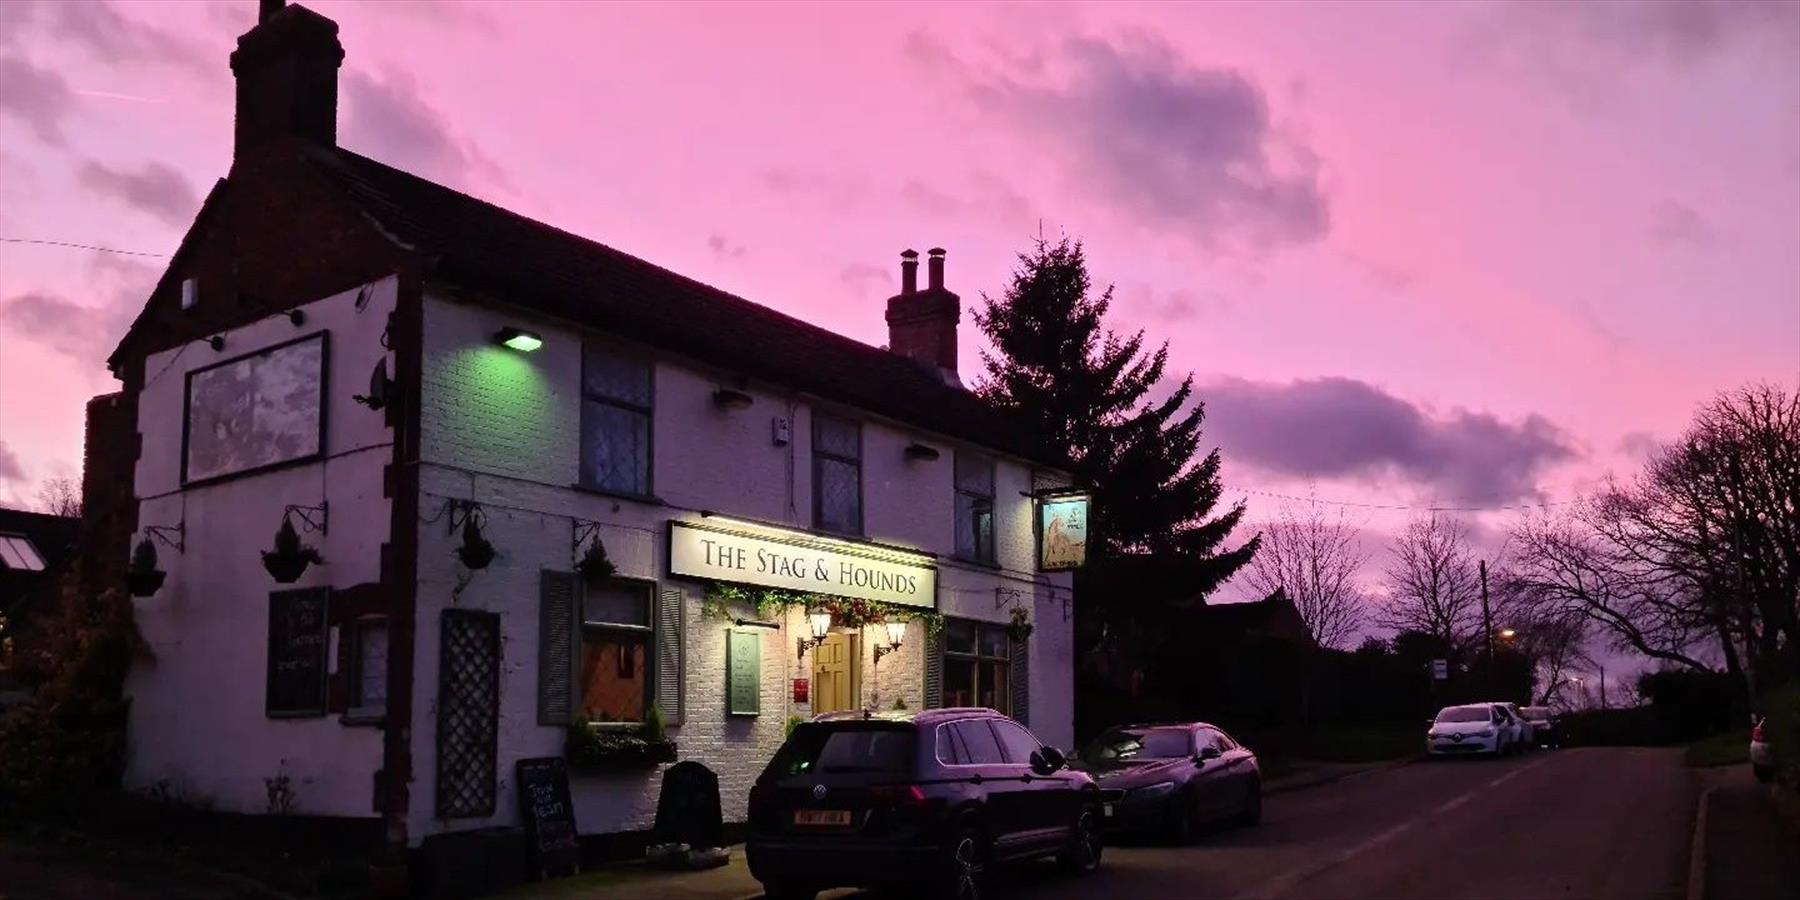 The Stag and Hounds pub under a sunset